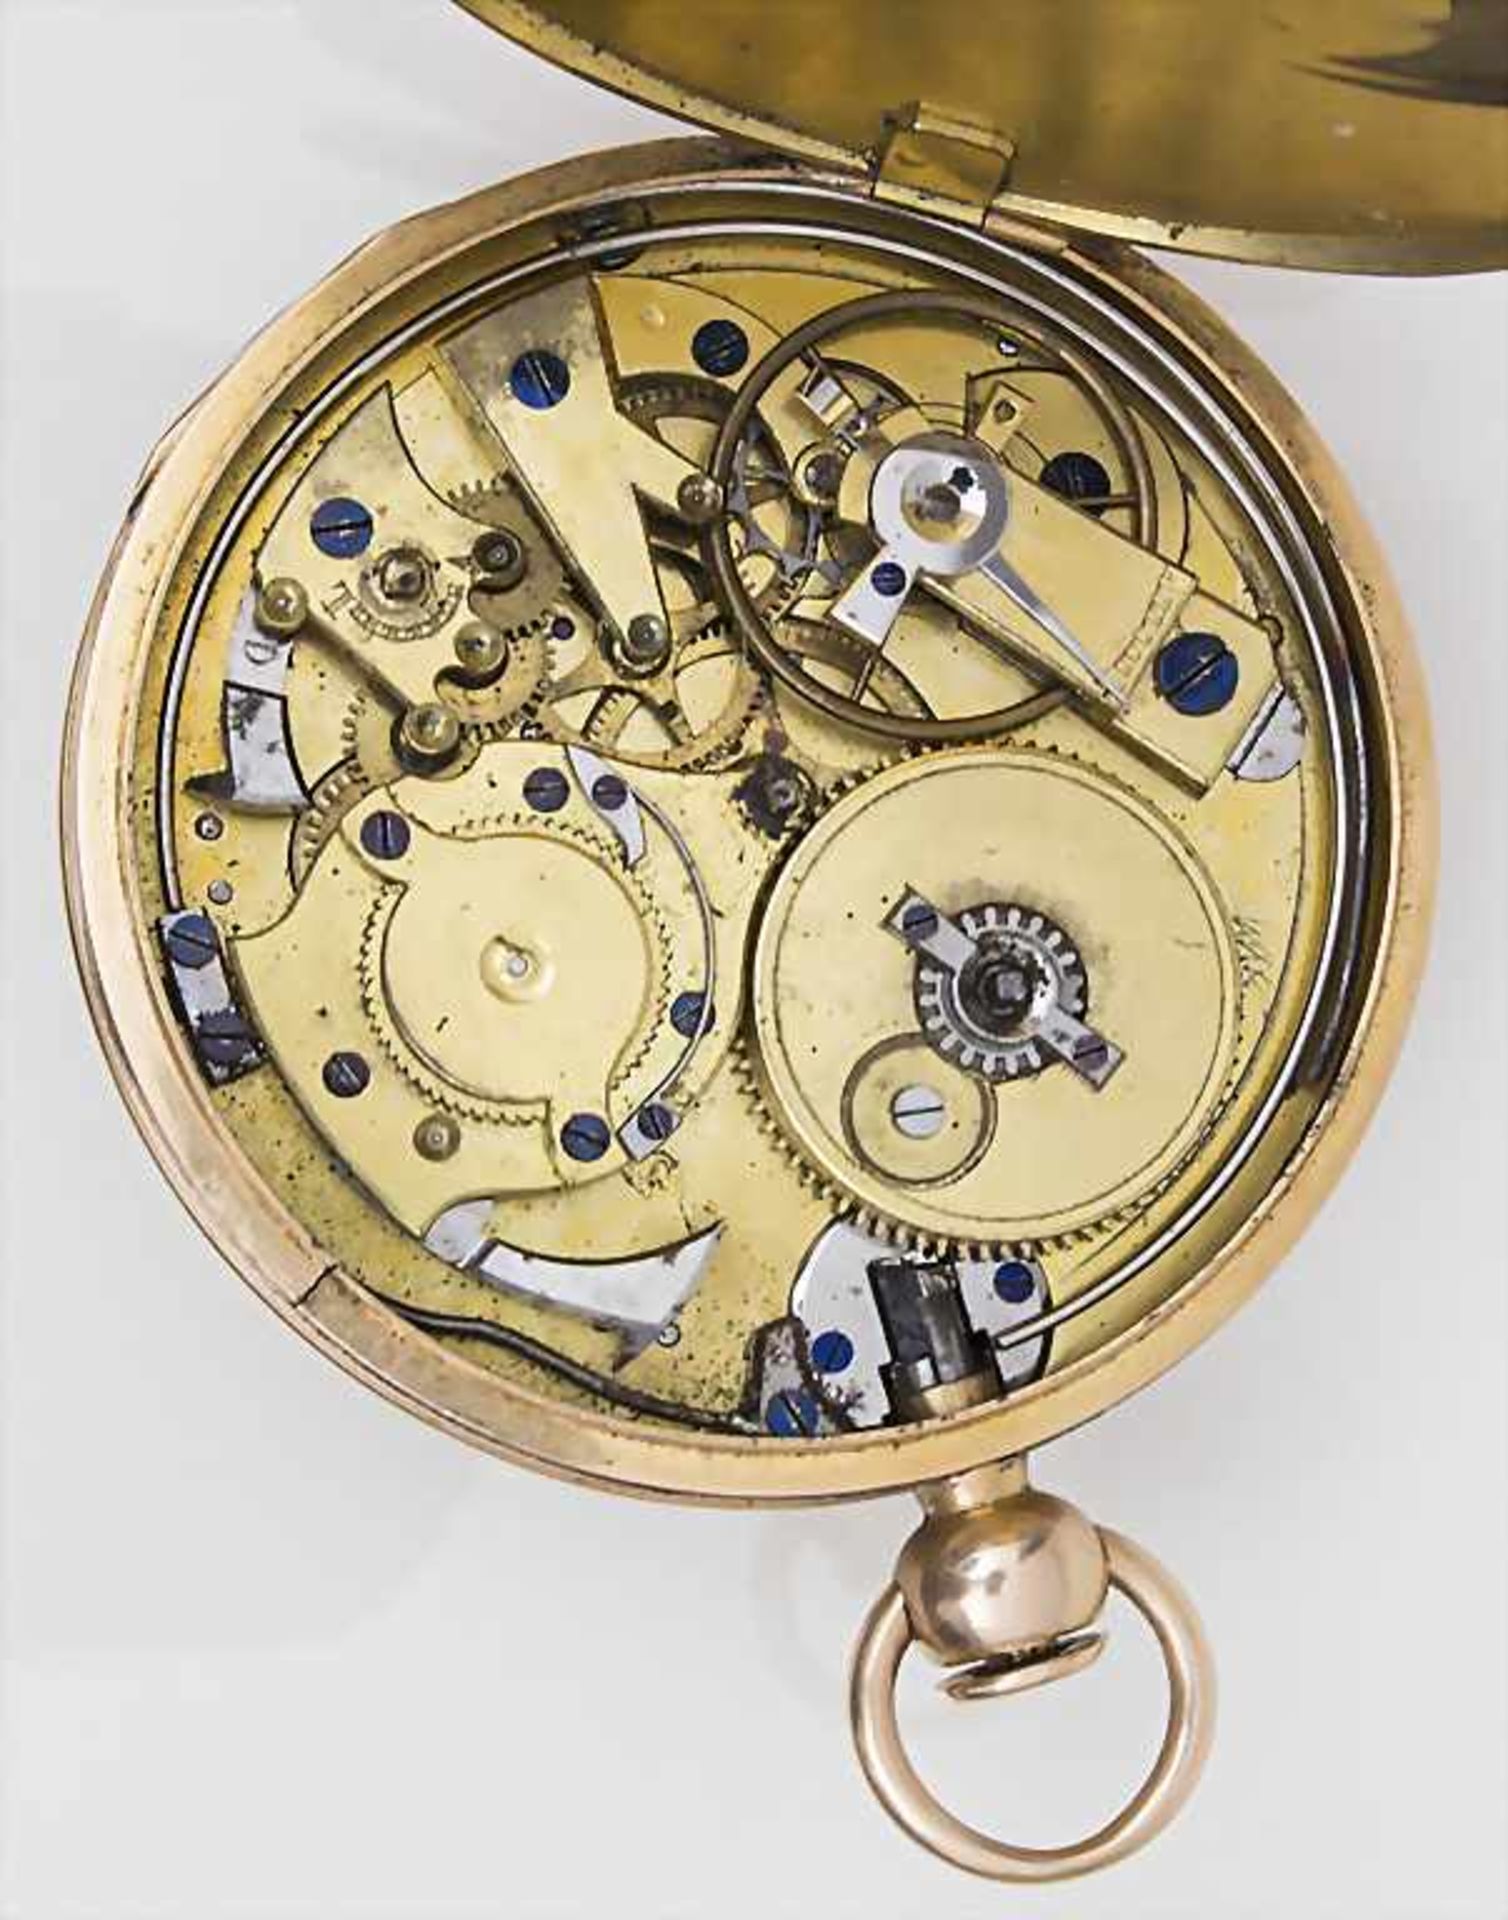 Offene Taschenuhr mit 1/4 Repetition / A pocket watch 1/4 quarter repeater, Louis Mallet, Paris, - Image 3 of 4